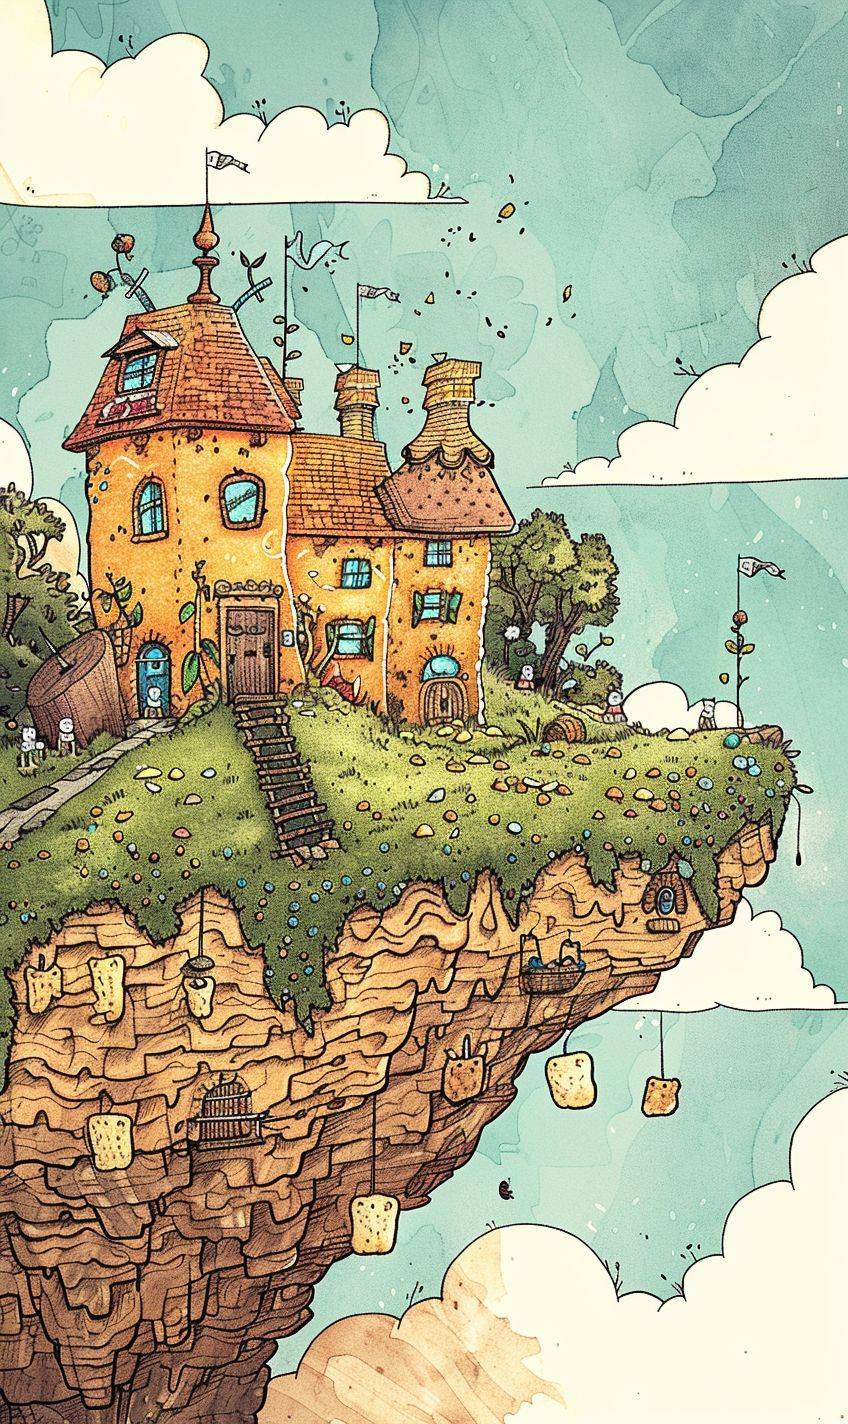 Illustration in Liniers' style of a small world called Crumbland, where everything is made of bread crumbs. We see fantastical landscapes with houses made of crispy crusts and adorable creatures made of bread crumbs --ar 3:5